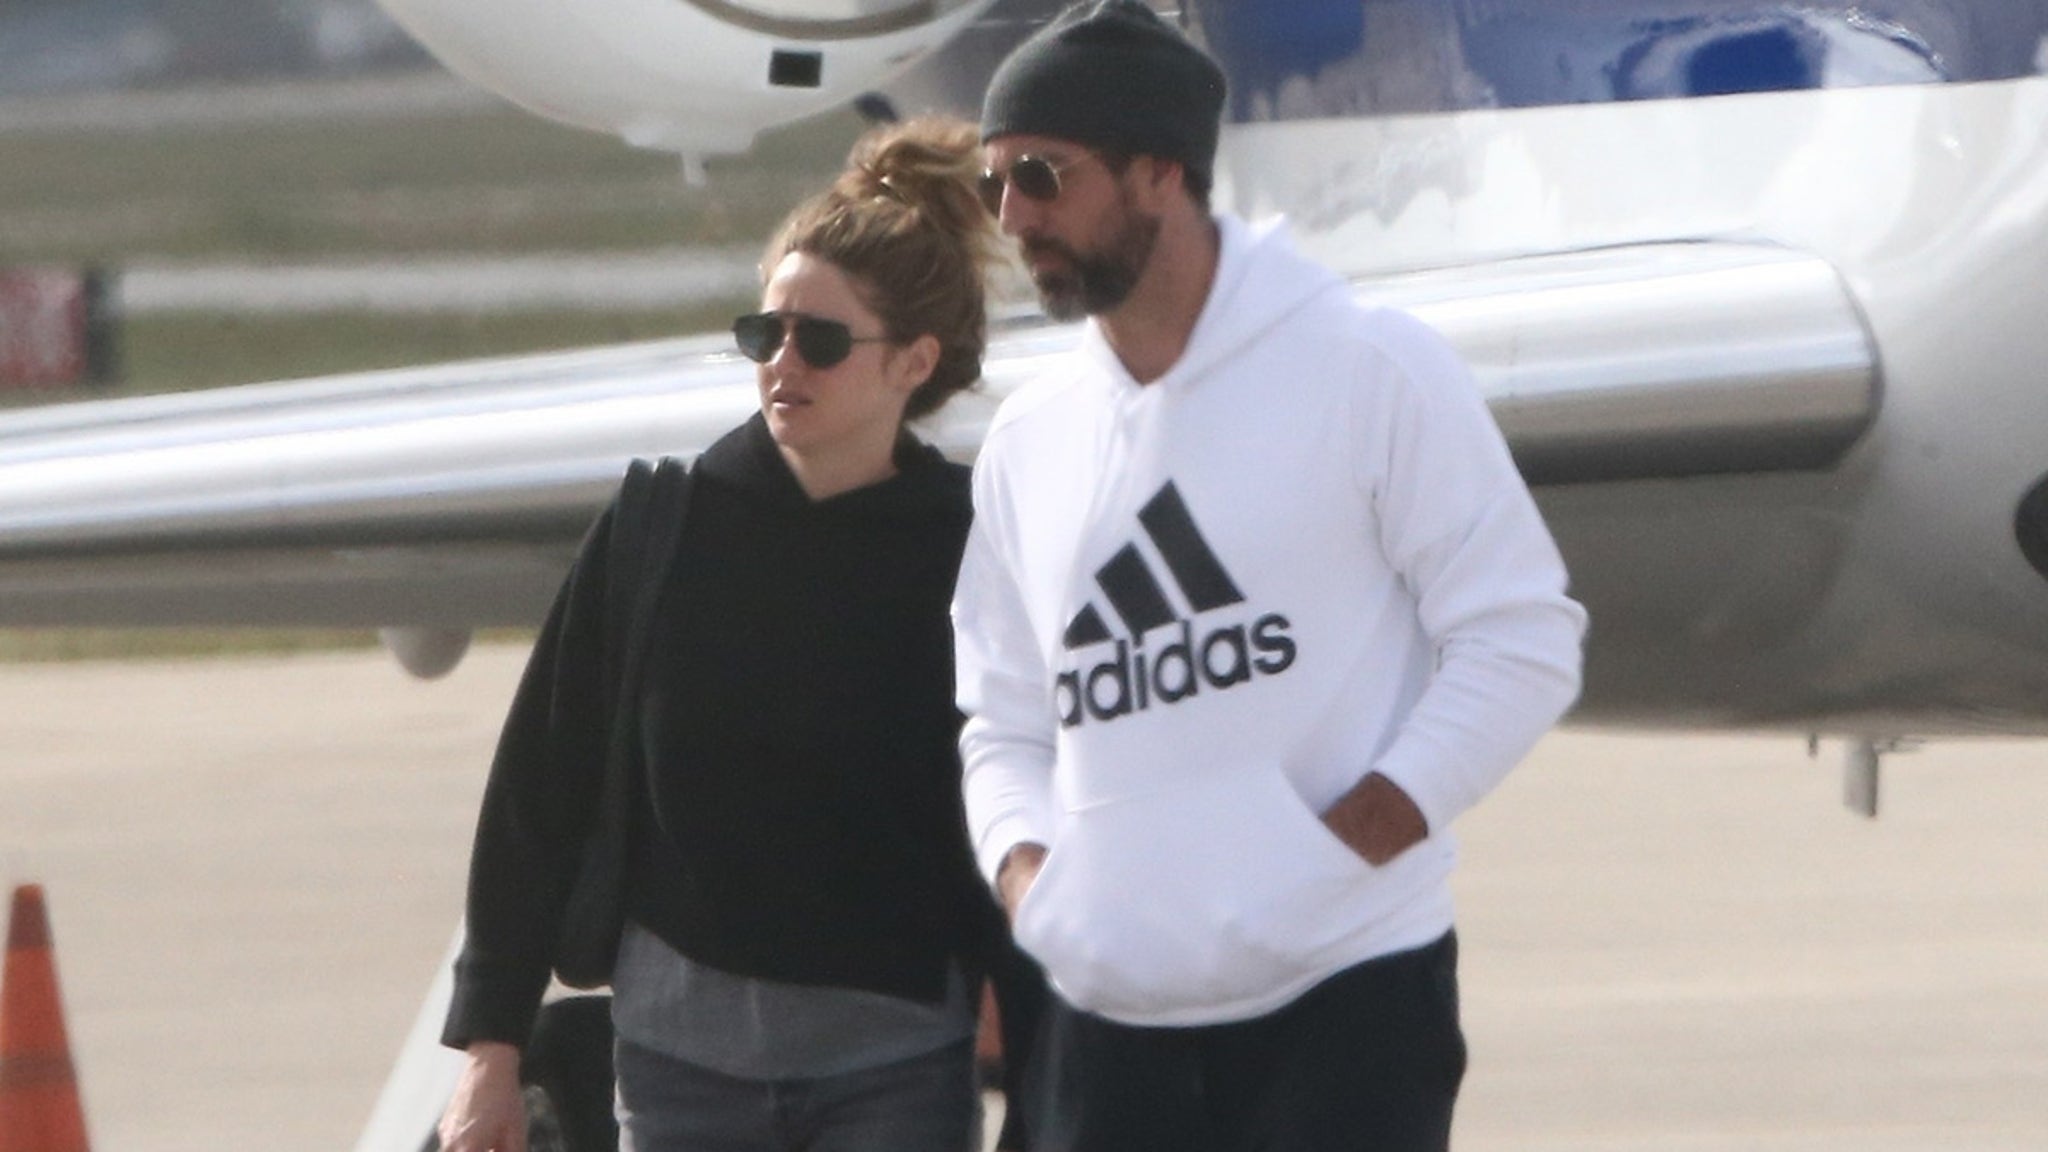 Aaron Rodgers and Shailene woodley together again, Spotted in South Florida thumbnail